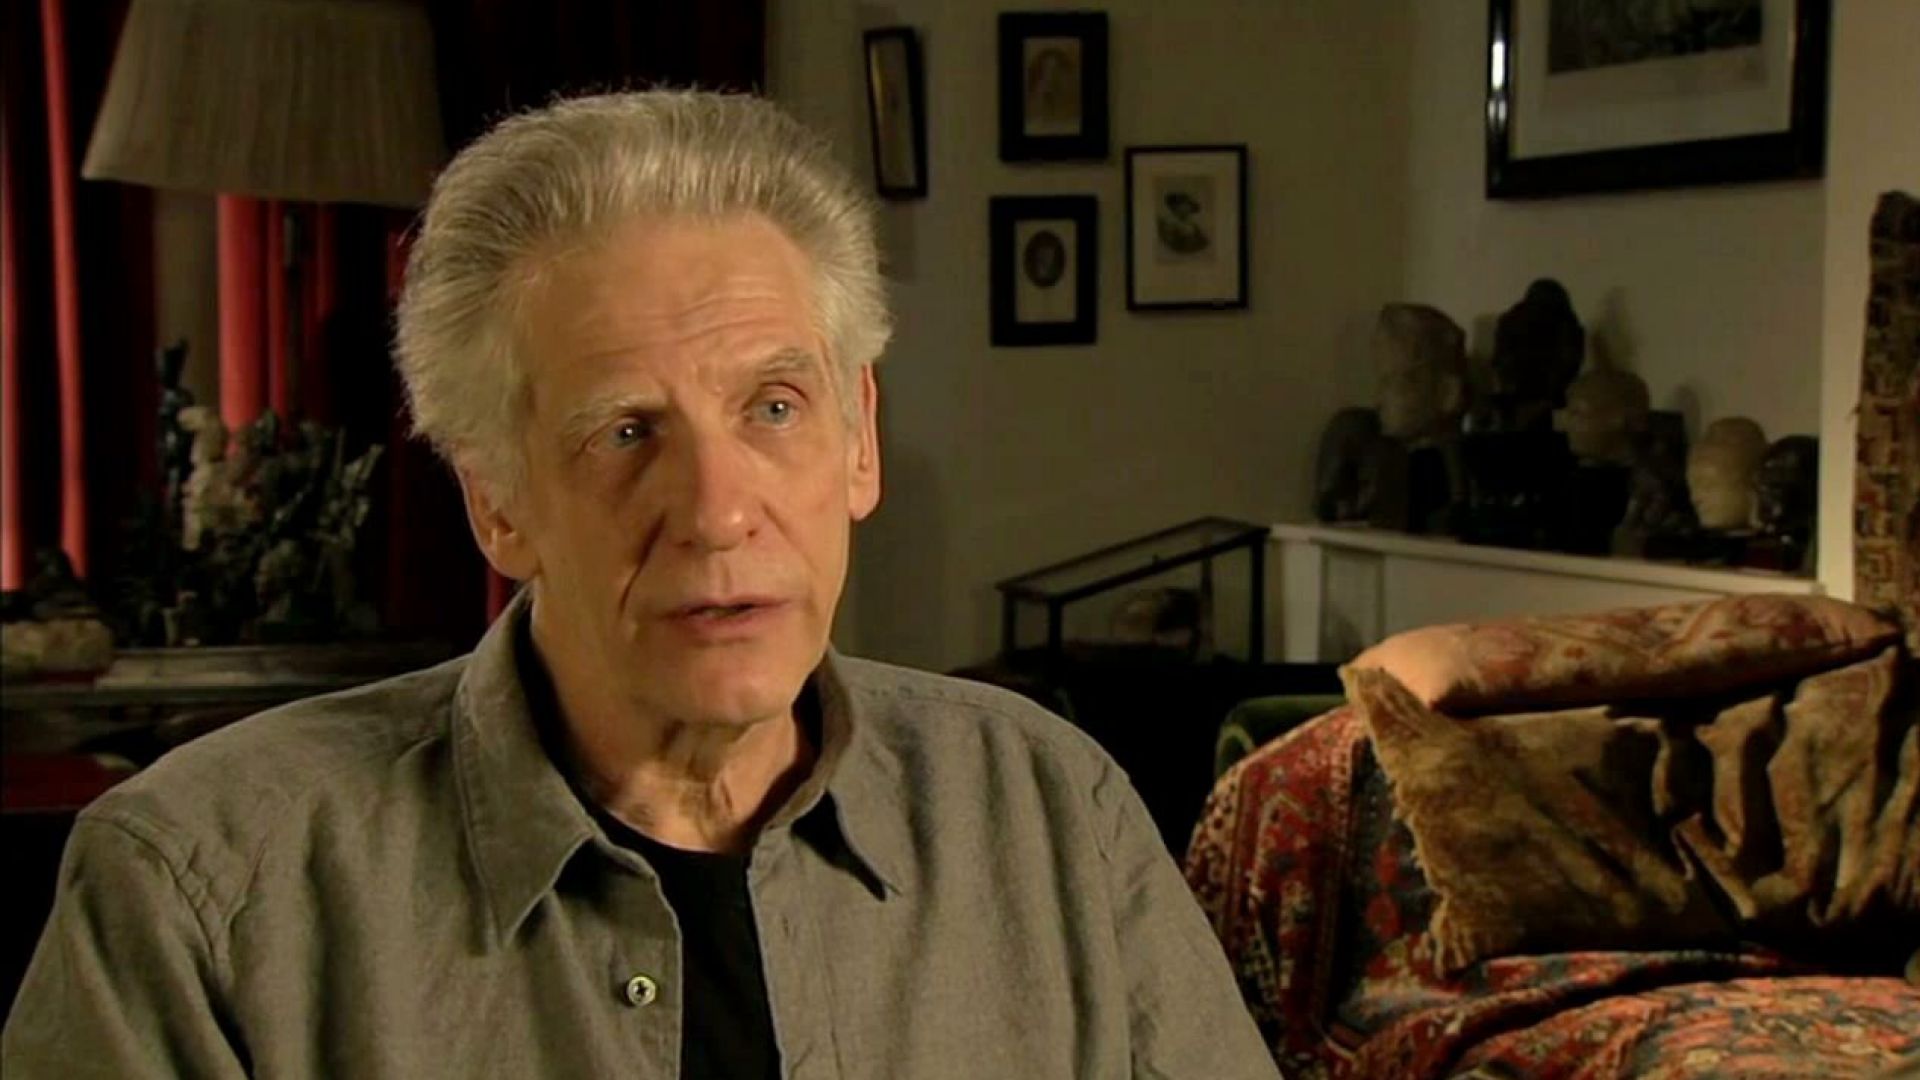 David Cronenberg talks about Otto Gross, Keira Knightley and A Dangerous Method